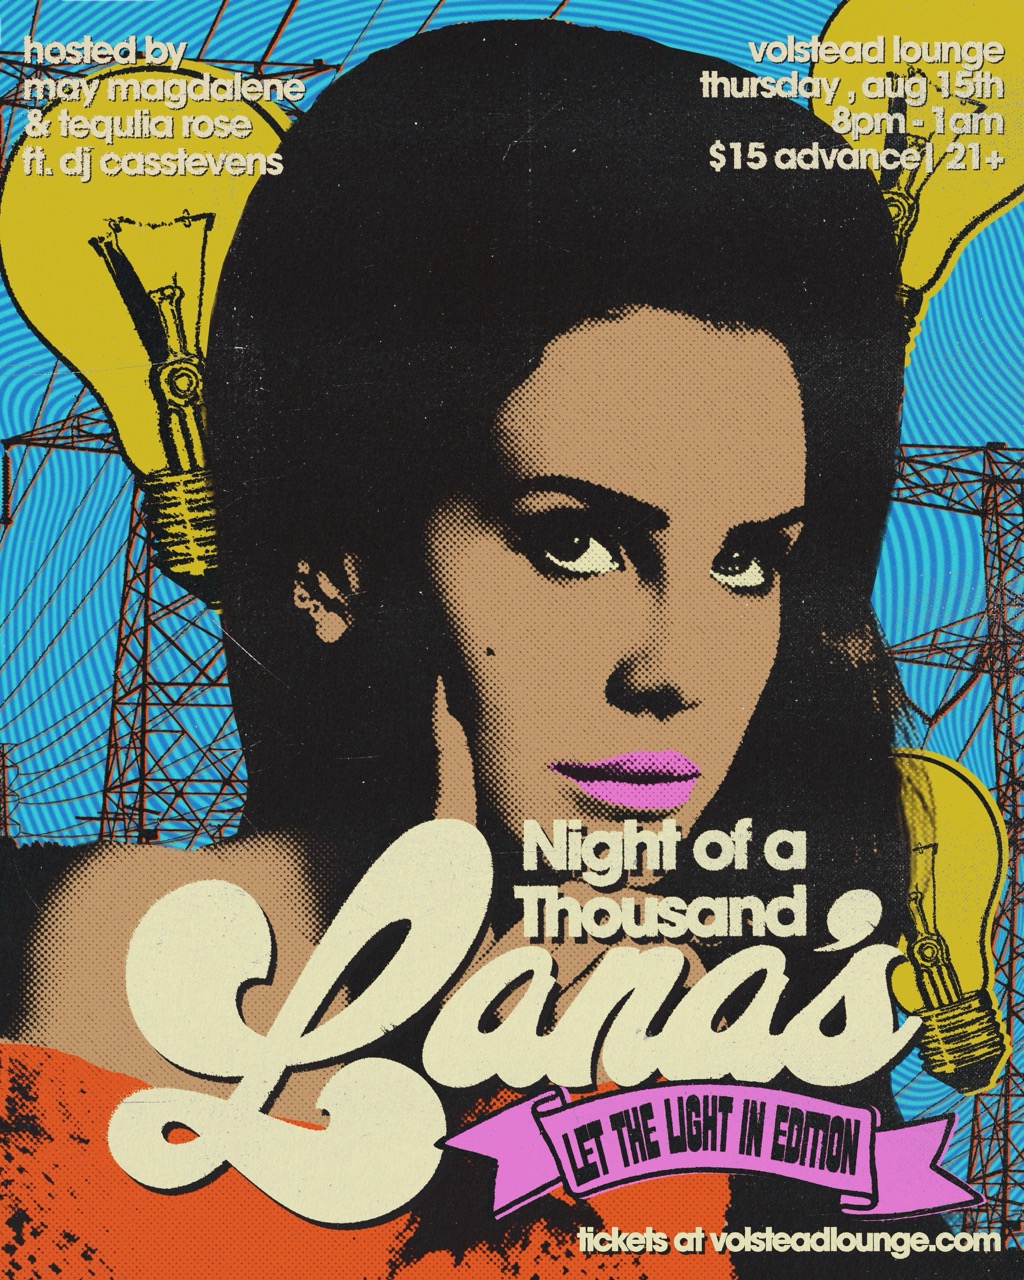 Night of A Thousand Lana's: Let the Light In Edition @ Volstead Lounge